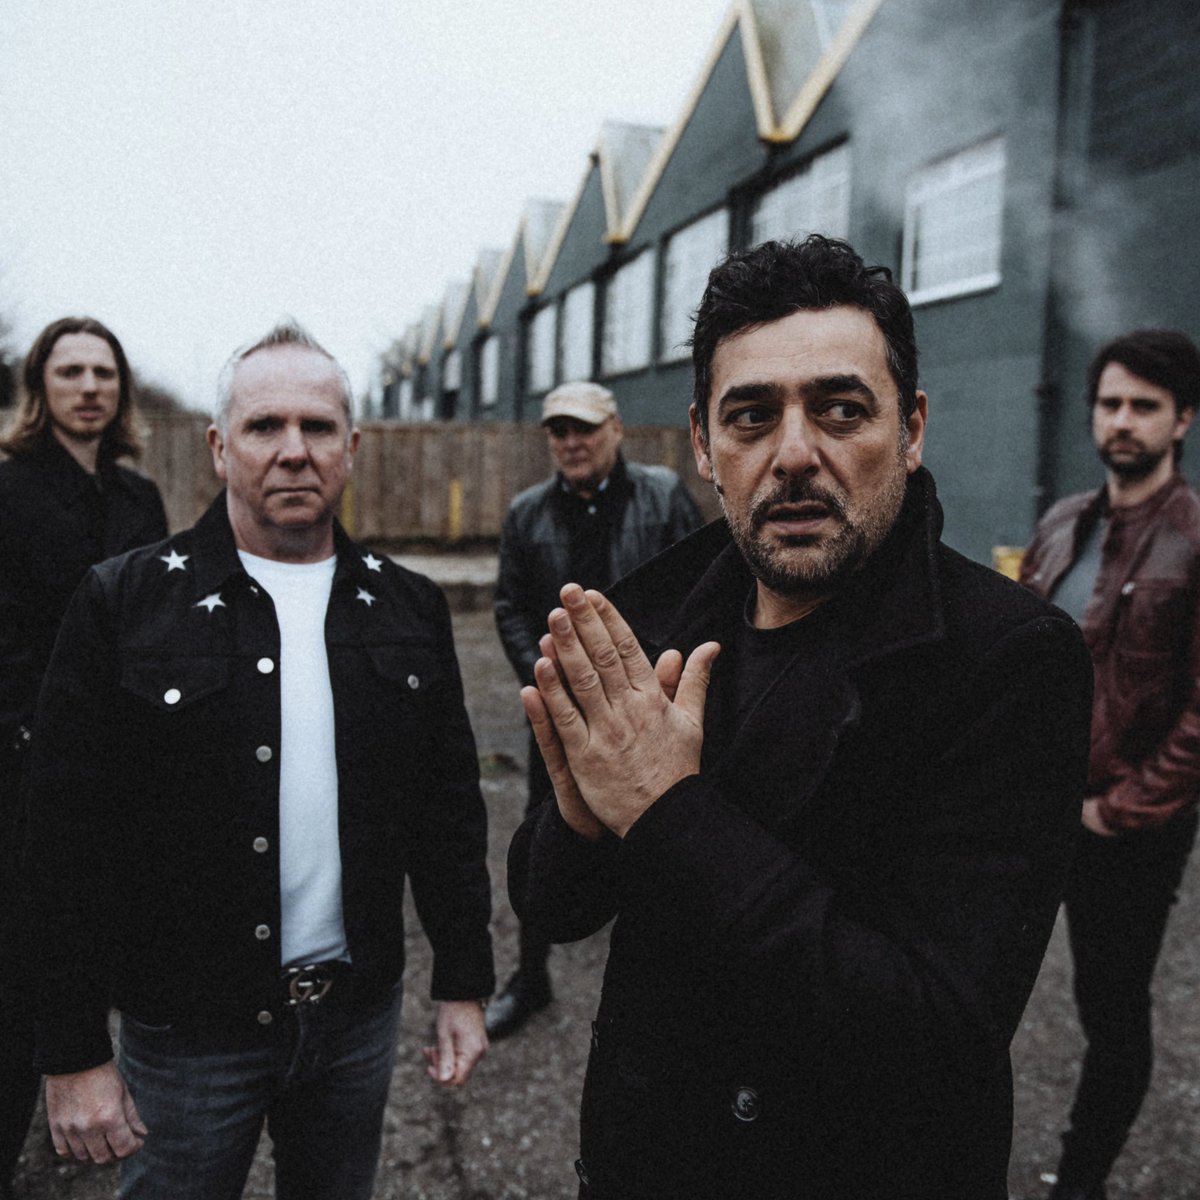 Announcing Scottish rock legends GUN @gunofficialuk here at SWX🤘🏼 With their latest studio offering ‘Hombres’ due April 12th they take the stage December 7th. Tickets go live Friday at 10am via @TicketWebUK *set reminder now. #SWX